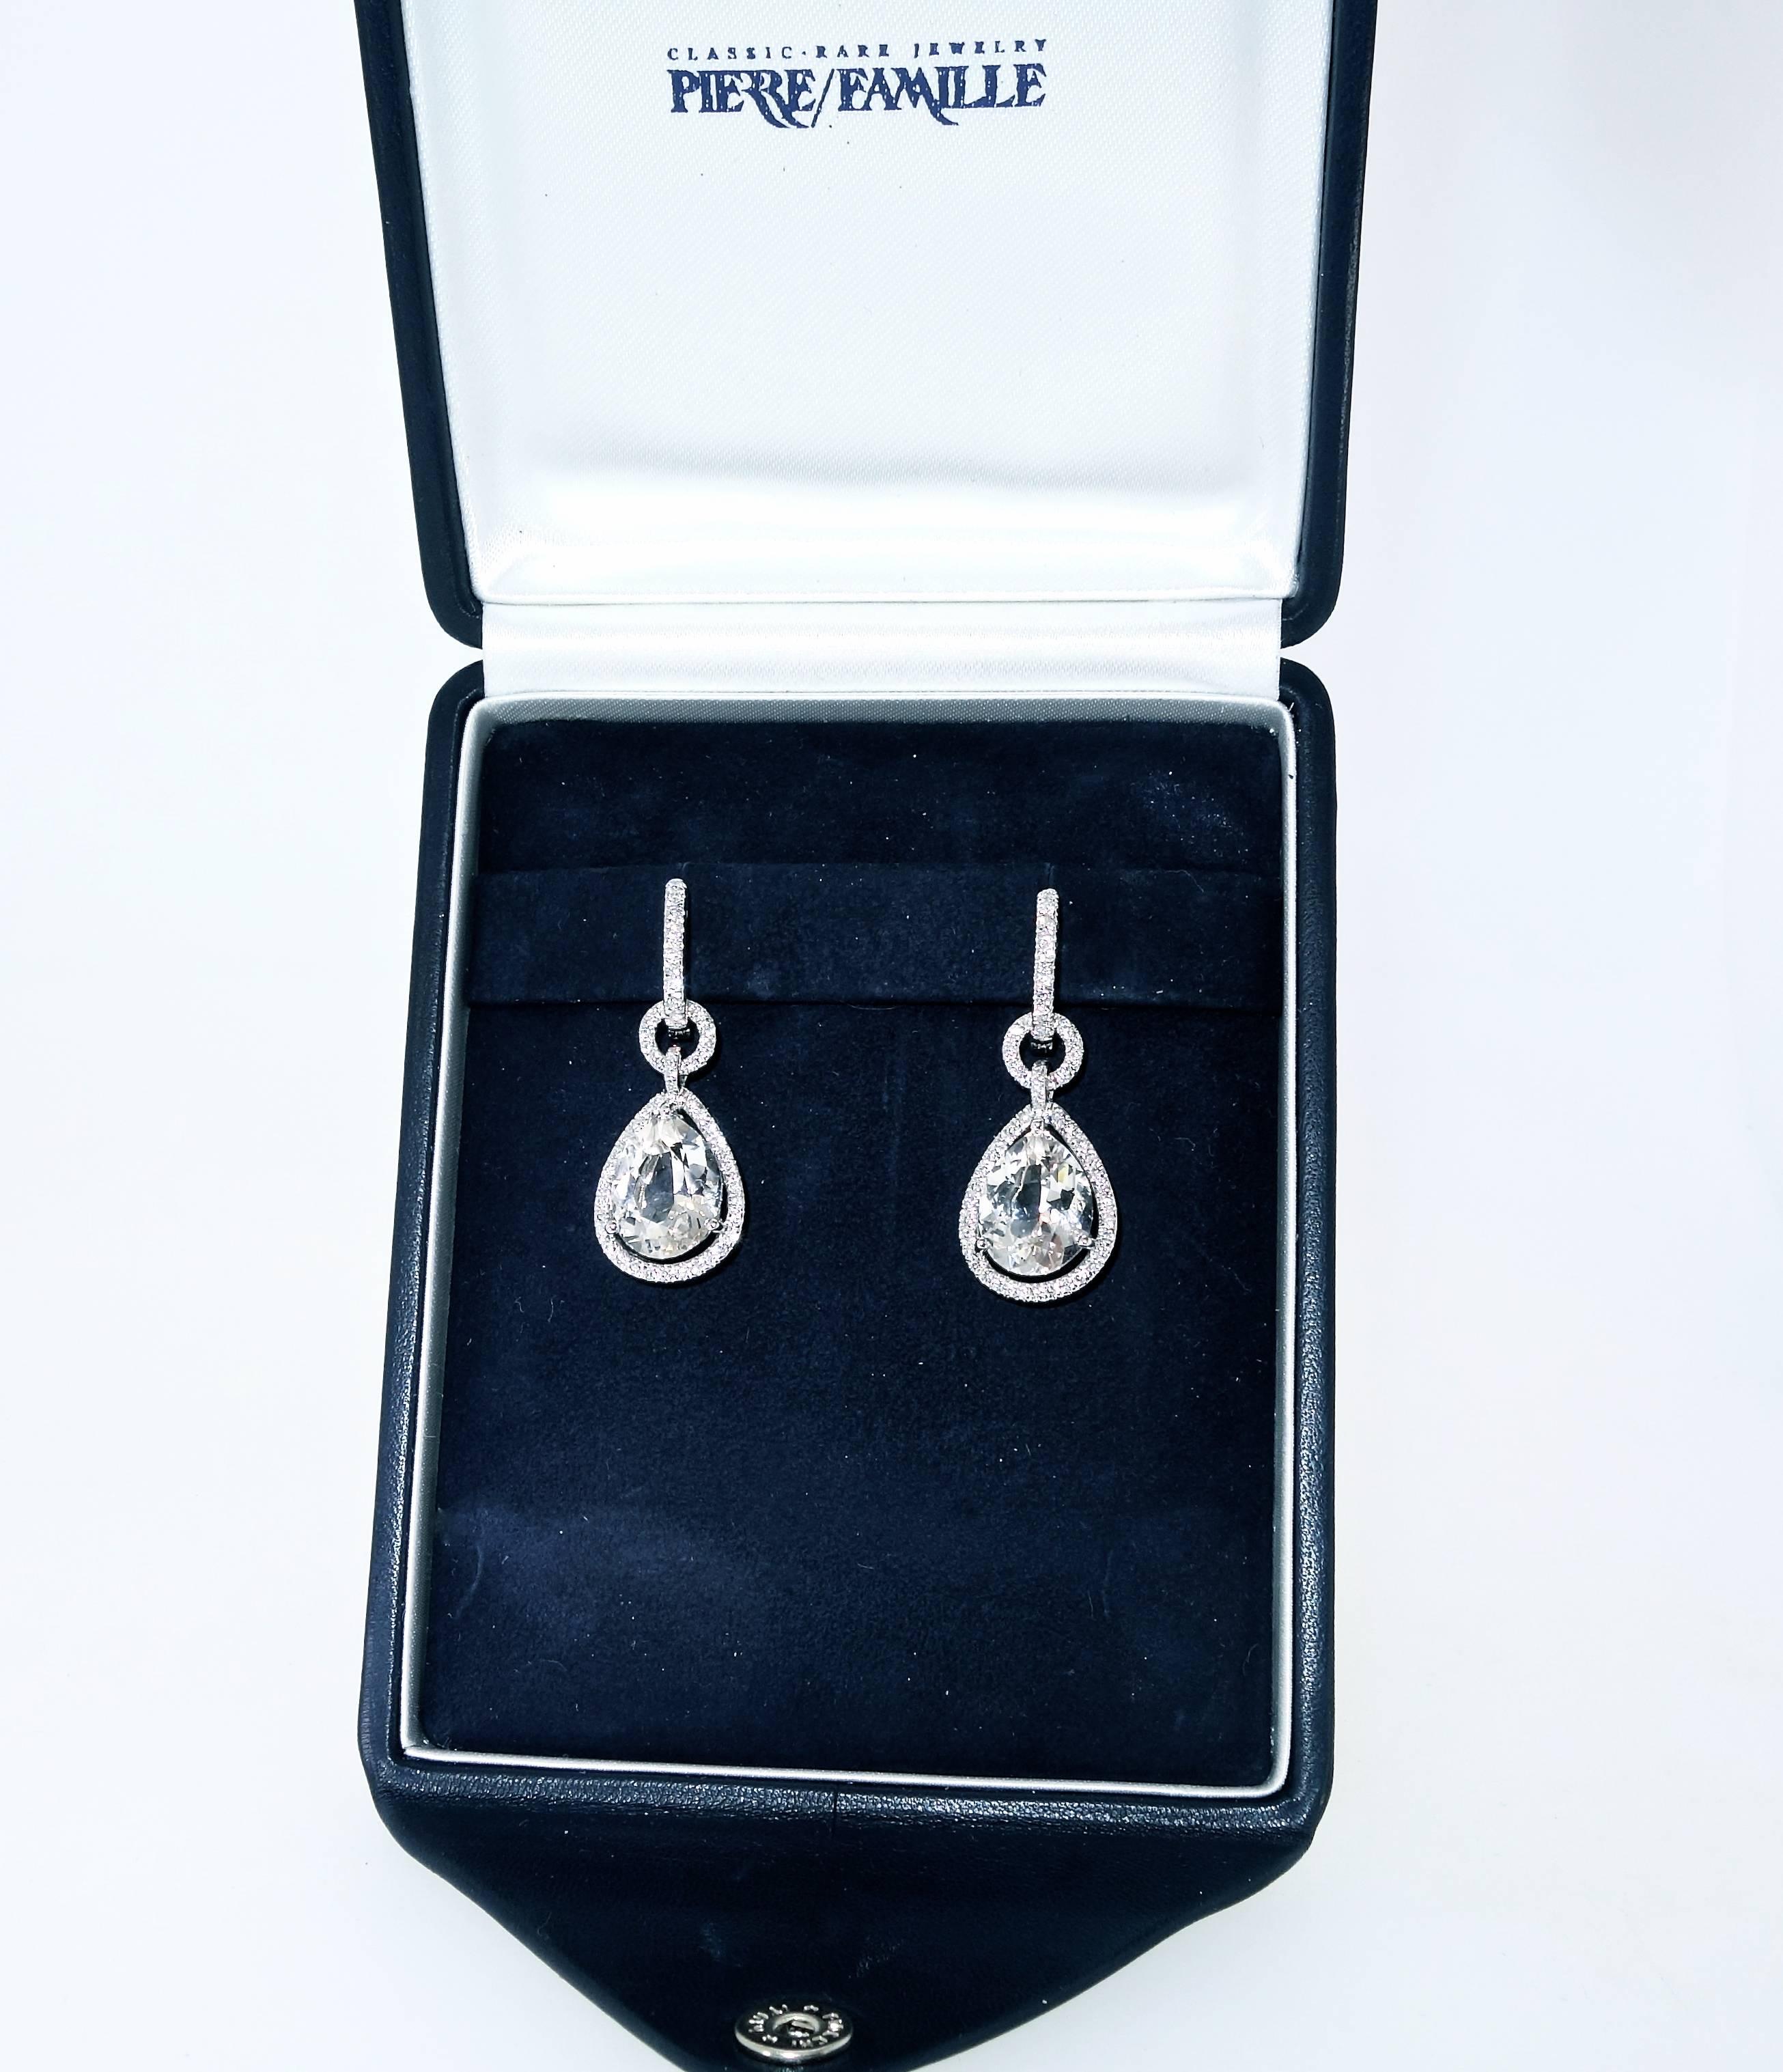 2.50 cts. of well matched, well cut modern round brilliant cut diamonds are set in hand made fine 18K white gold earrings which center a pear cut (diamond cut) white quartz natural stone each weighing approximately 5 cts.  The 112 diamonds are all